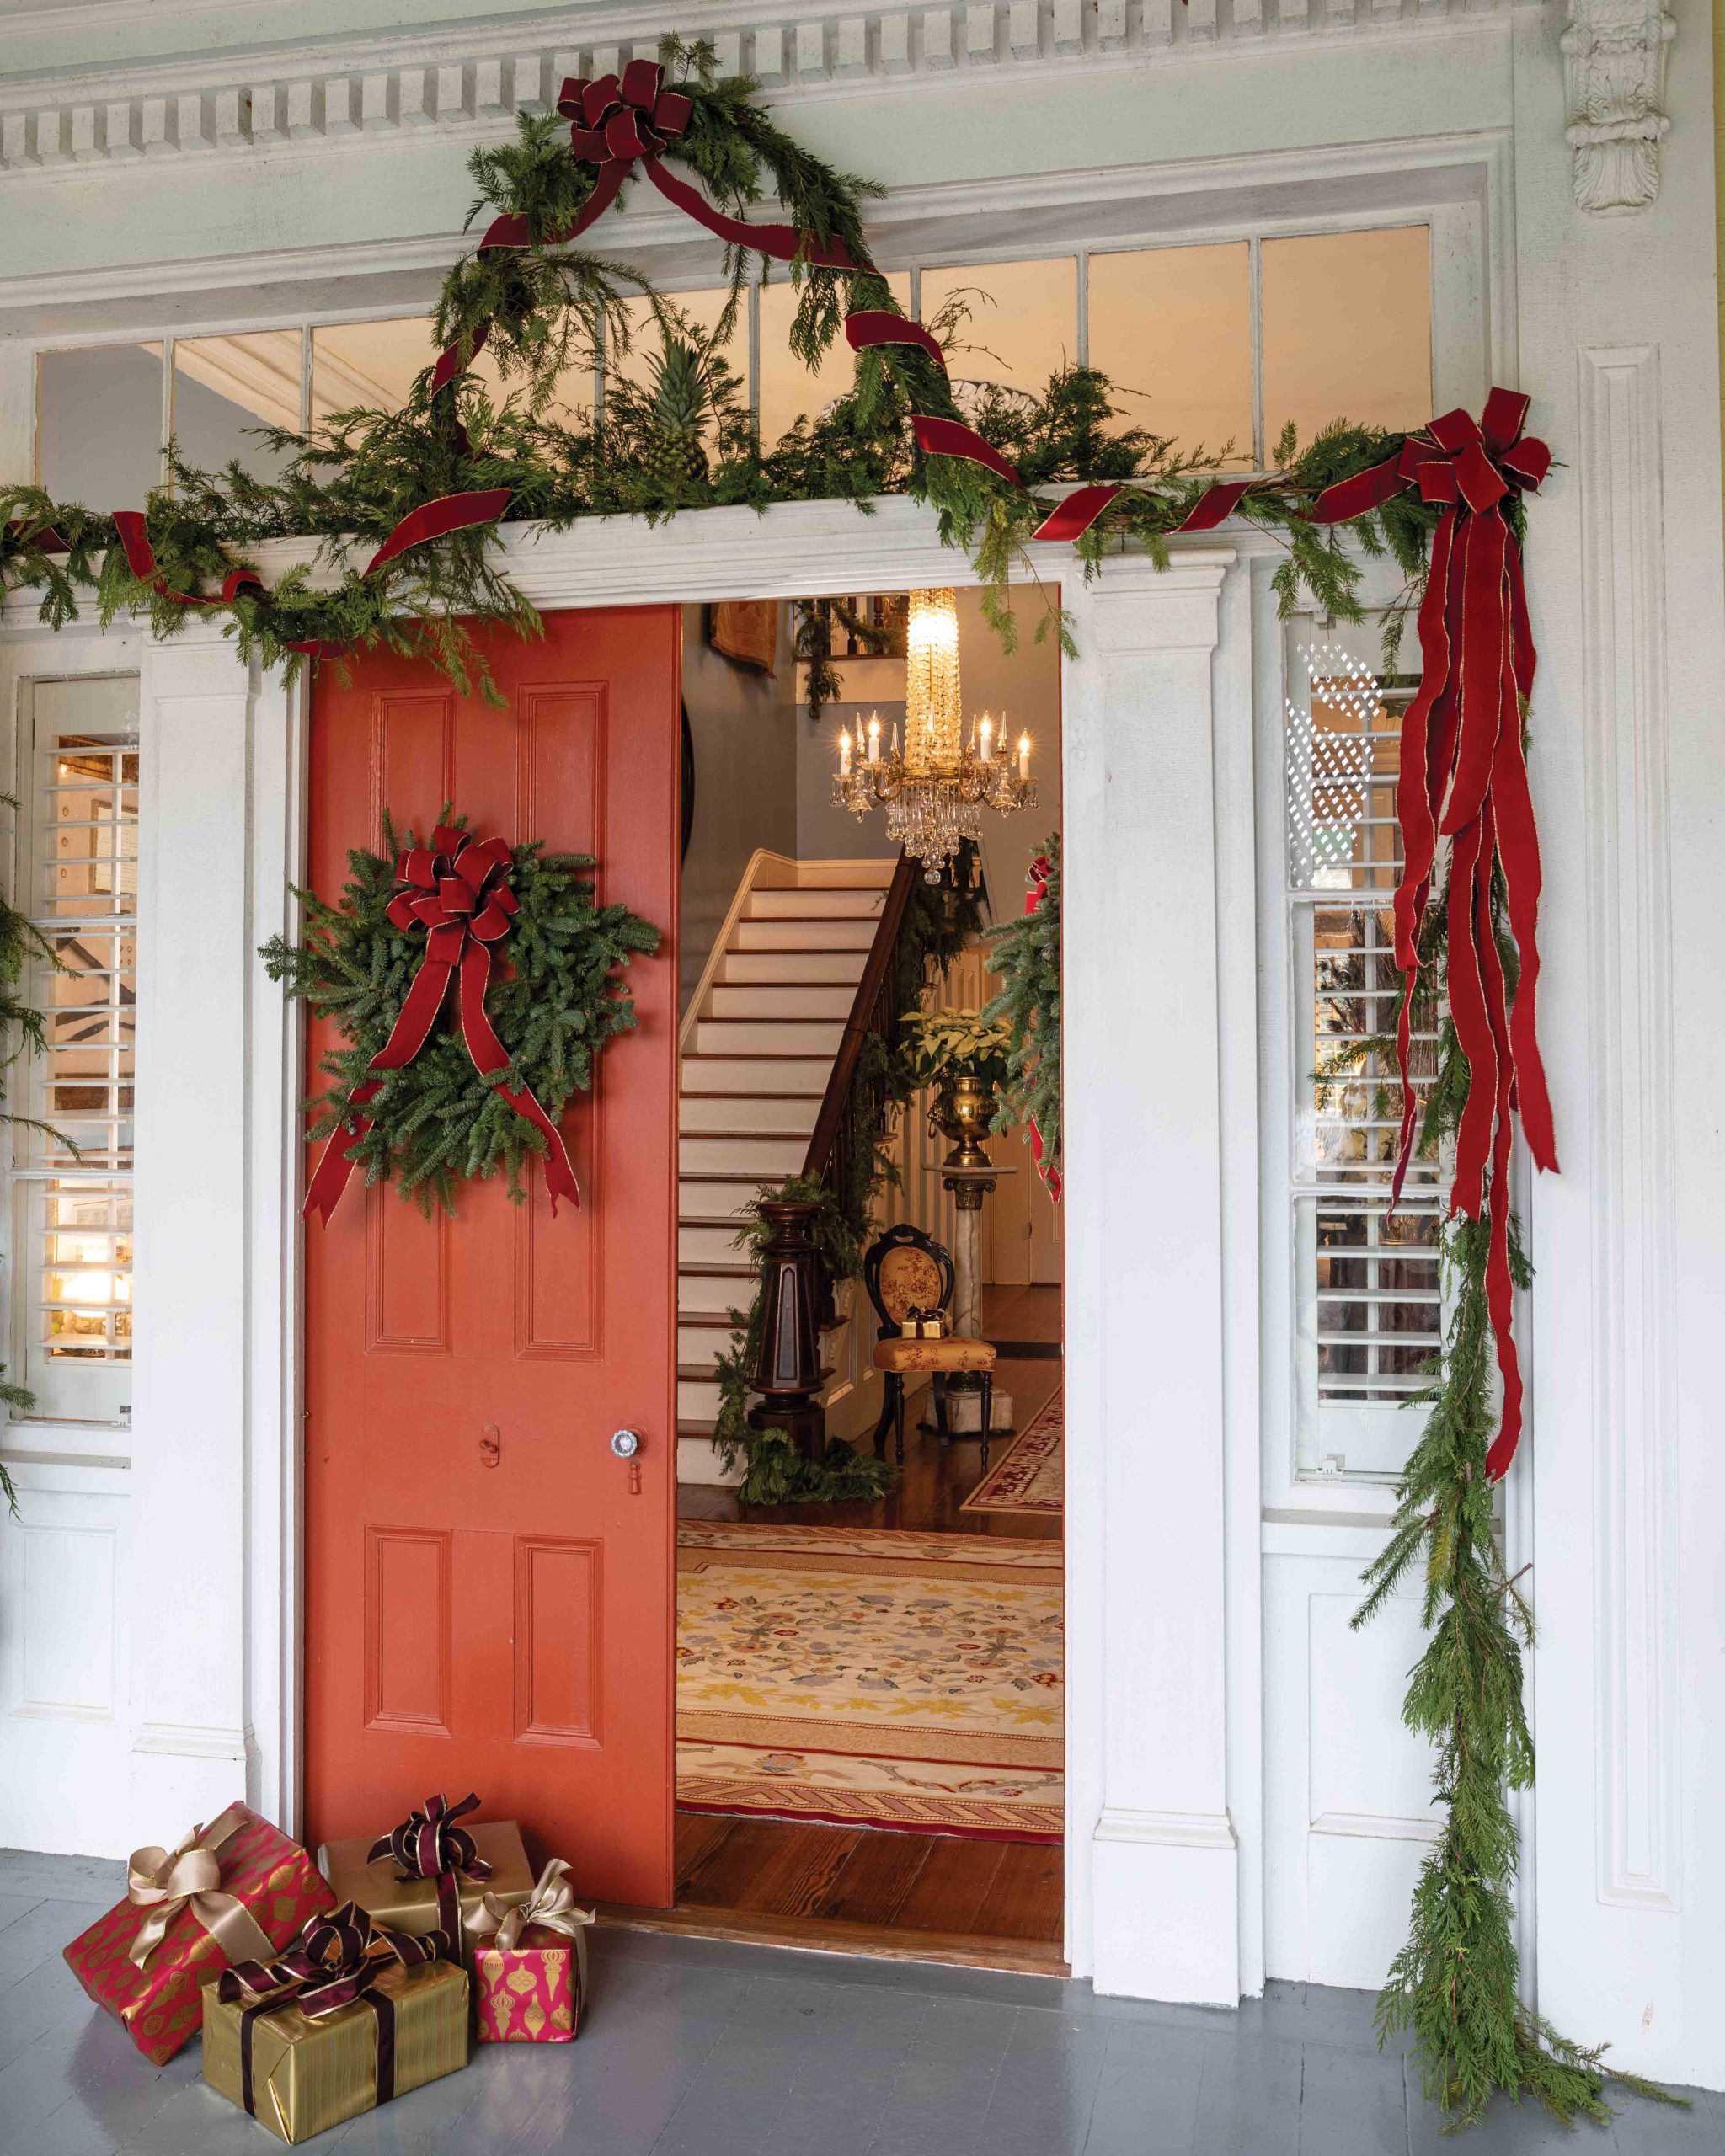 Simple evergreen garland wrapped with red ribbon coordinate with a traditional wreath upon the vibrant front door, welcoming the holiday season inside.